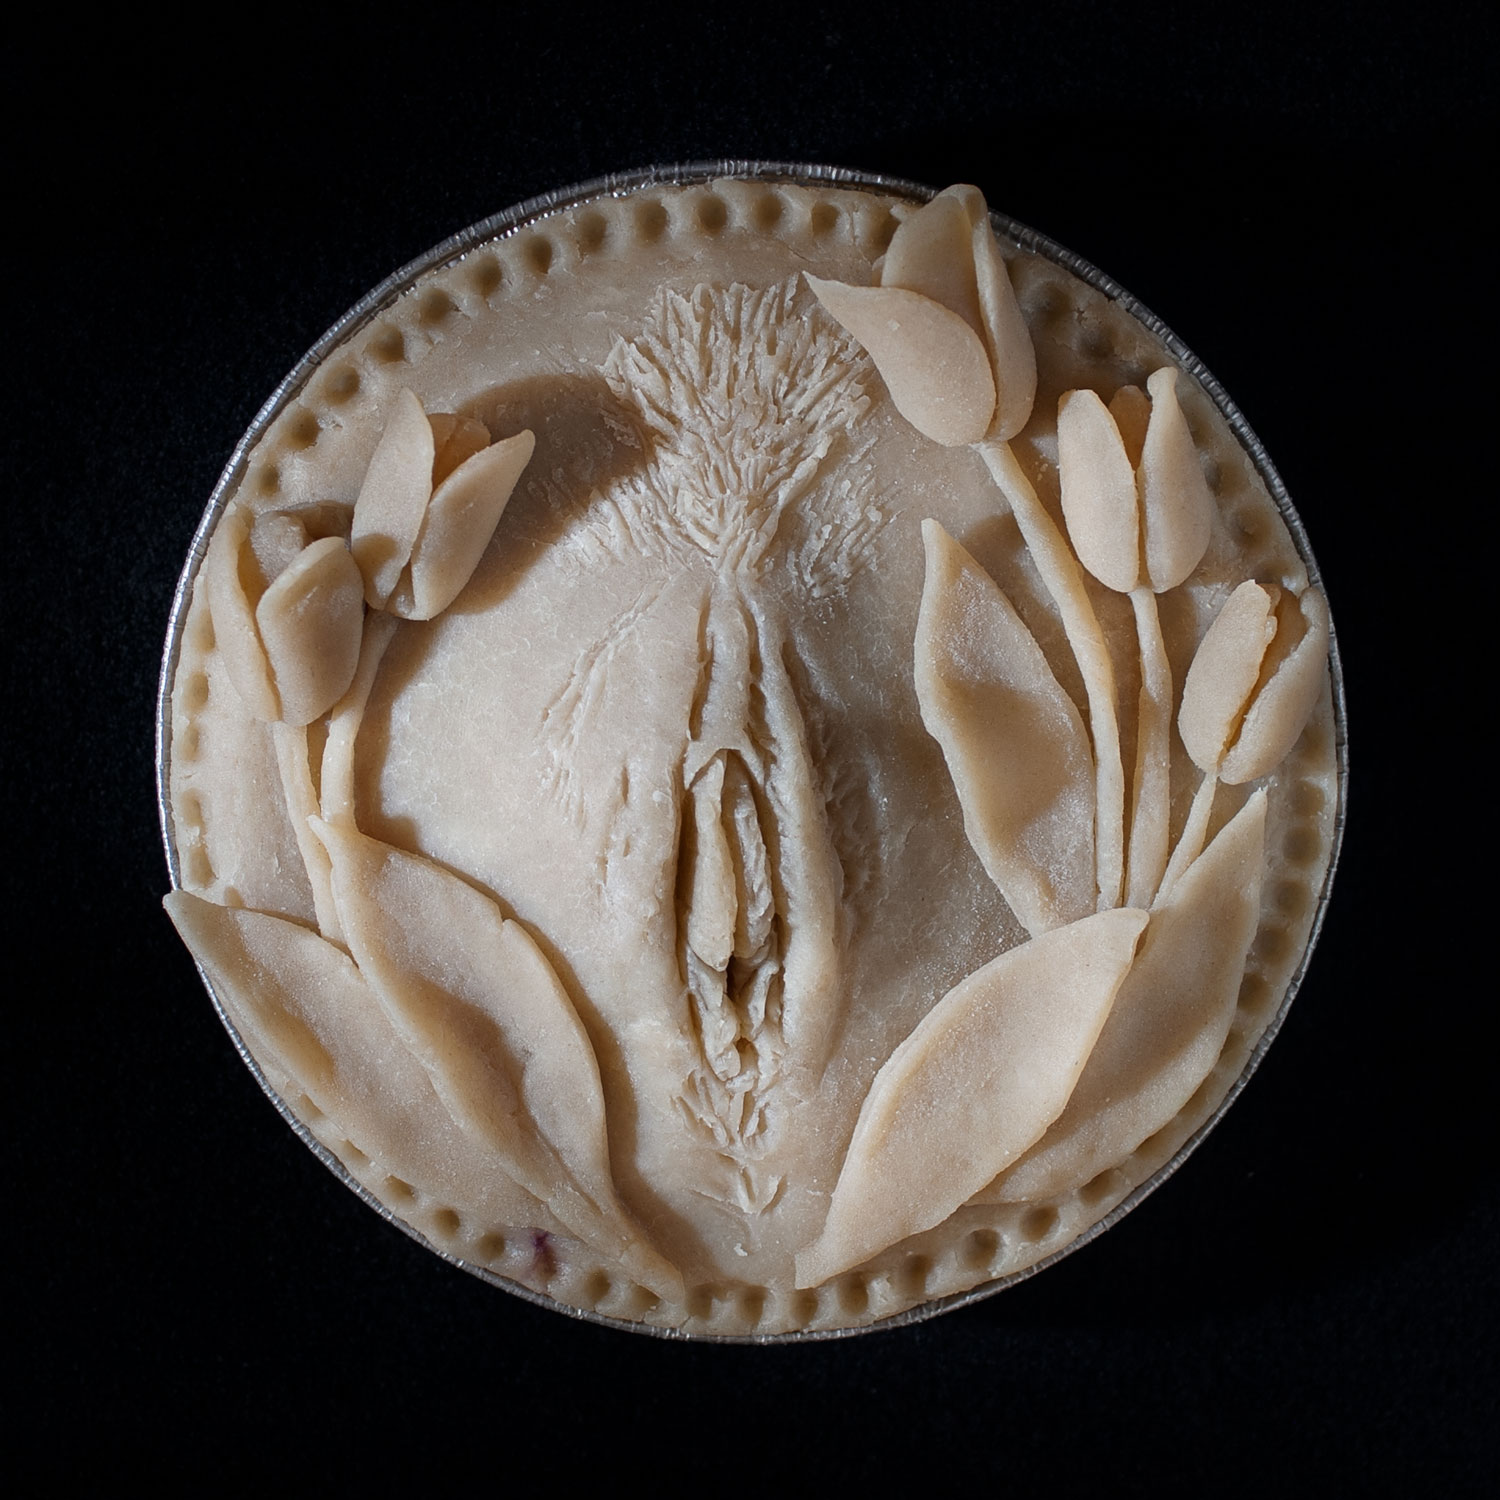 An unbaked pie on a black background. The hand sculpted pie crust art has a vulva in the center surrounded by a wreath of tulips.